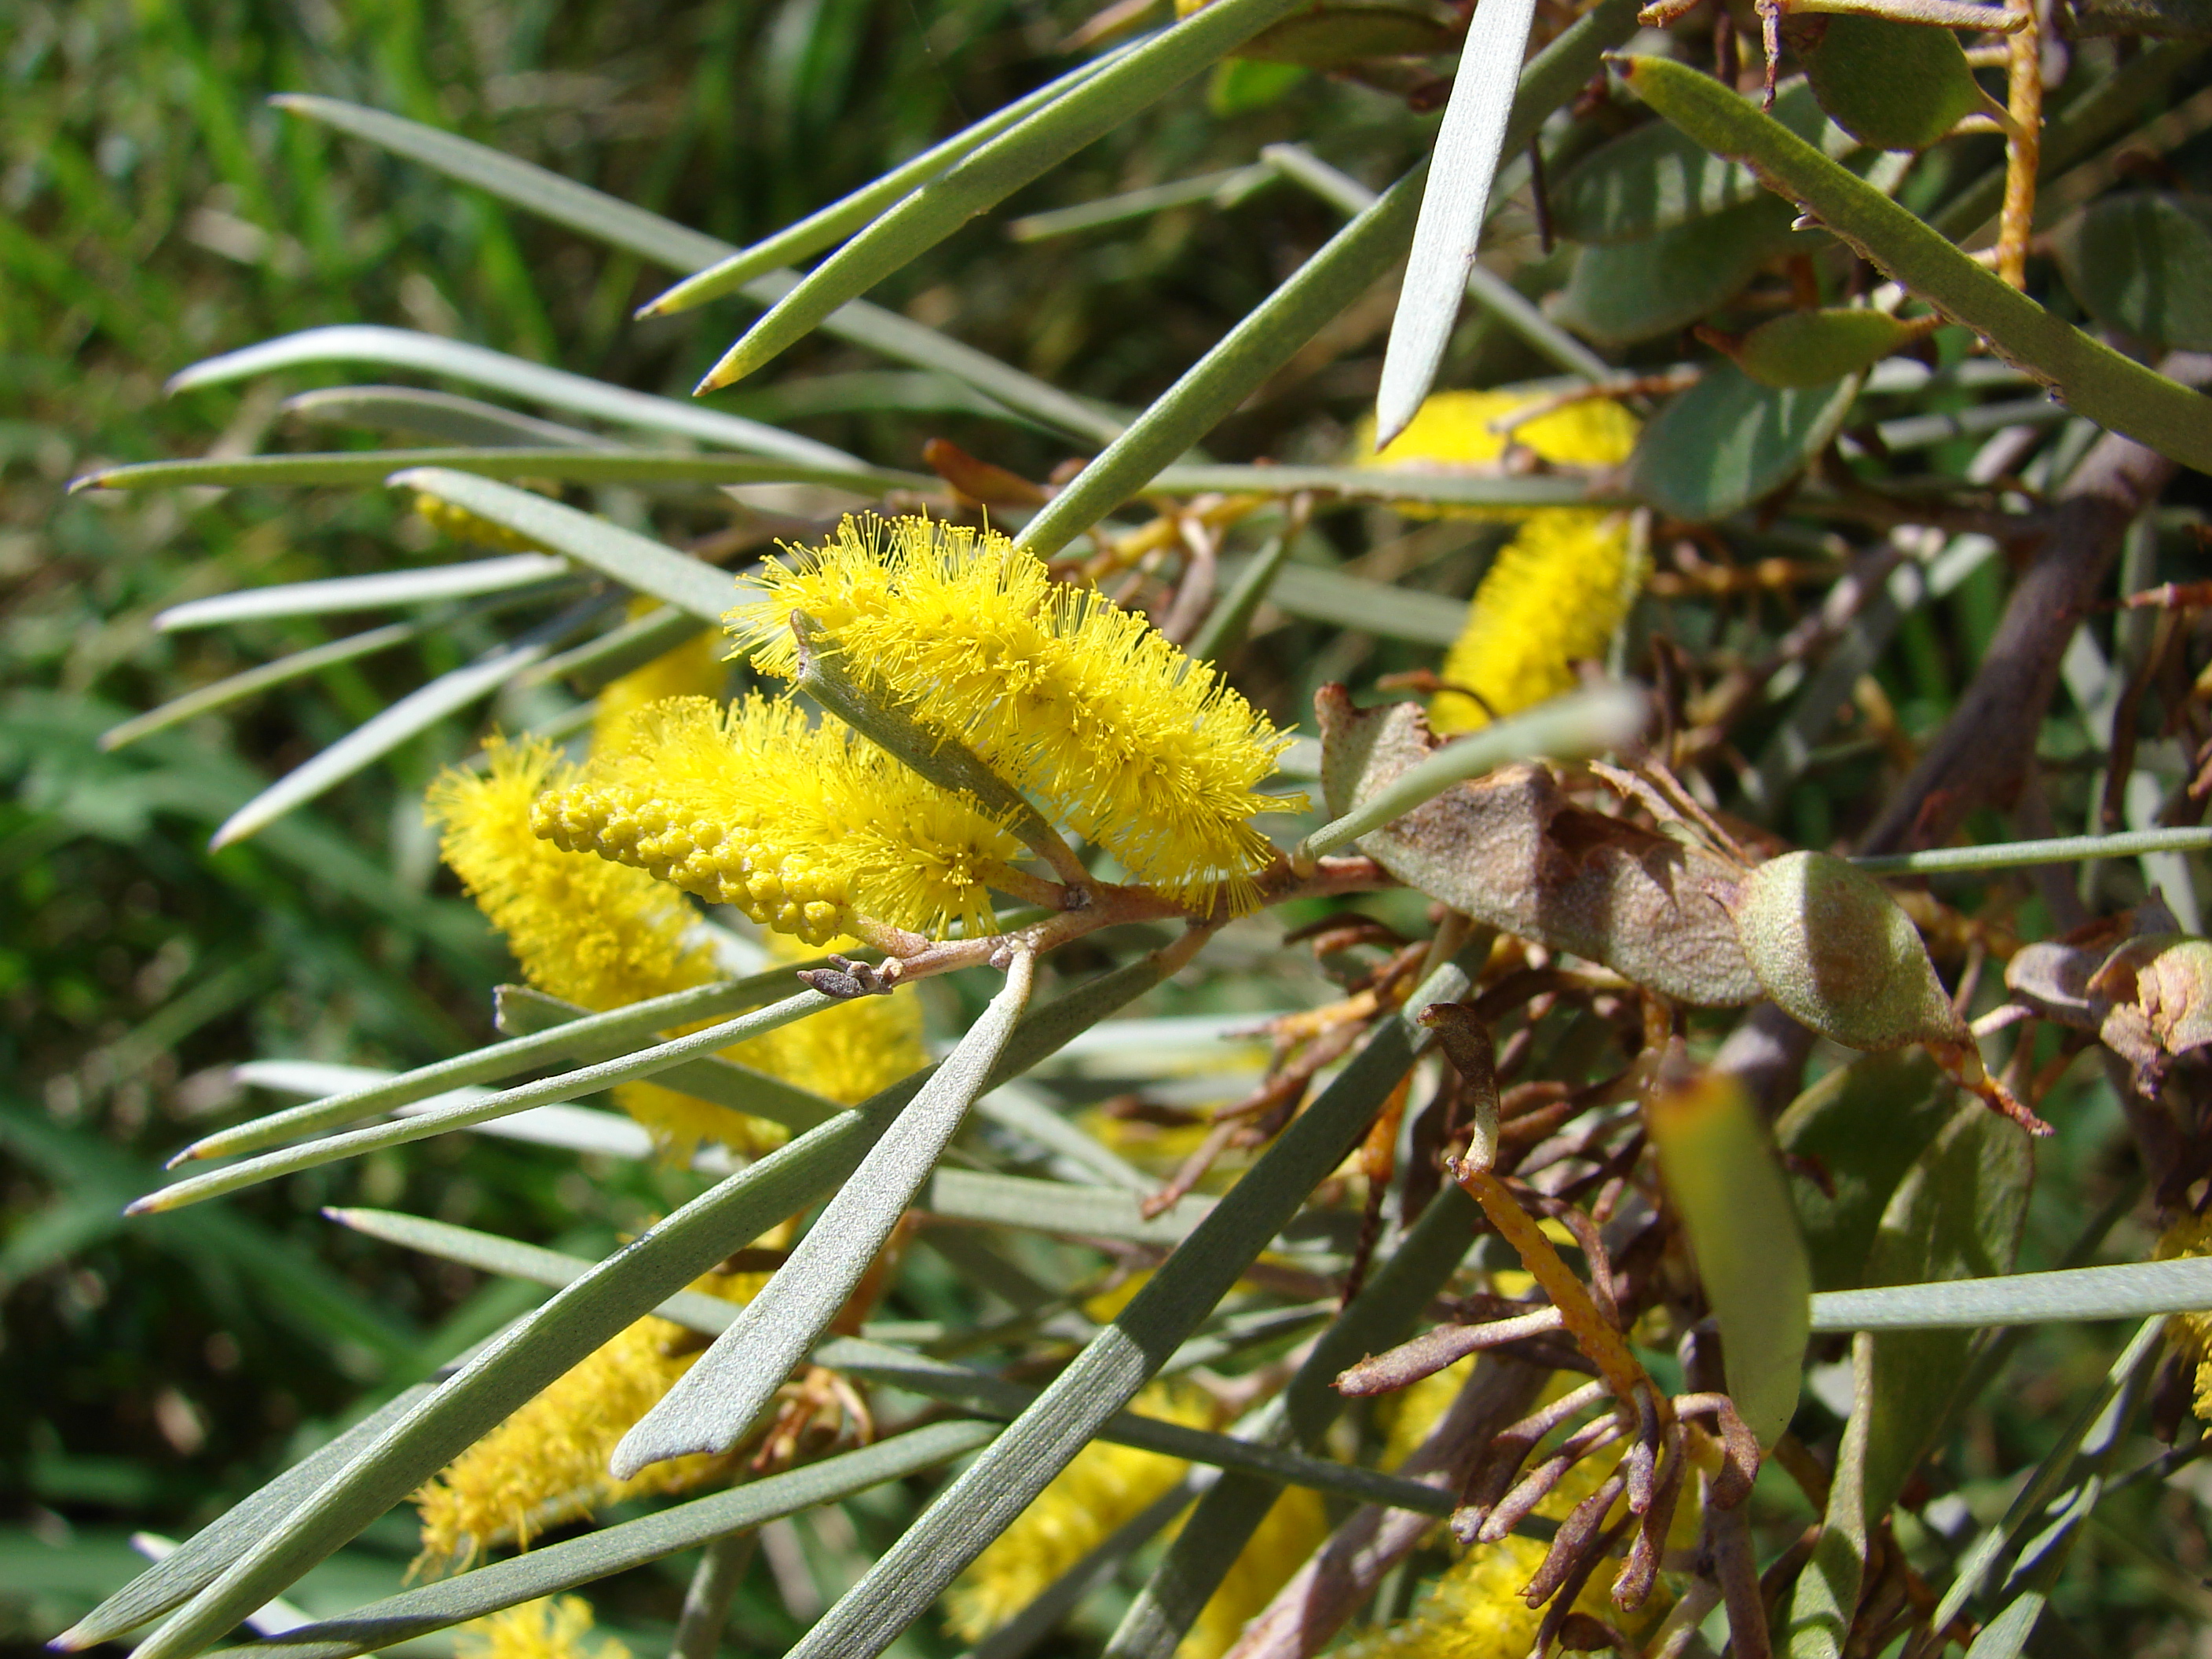 Acacia leaves and flowers